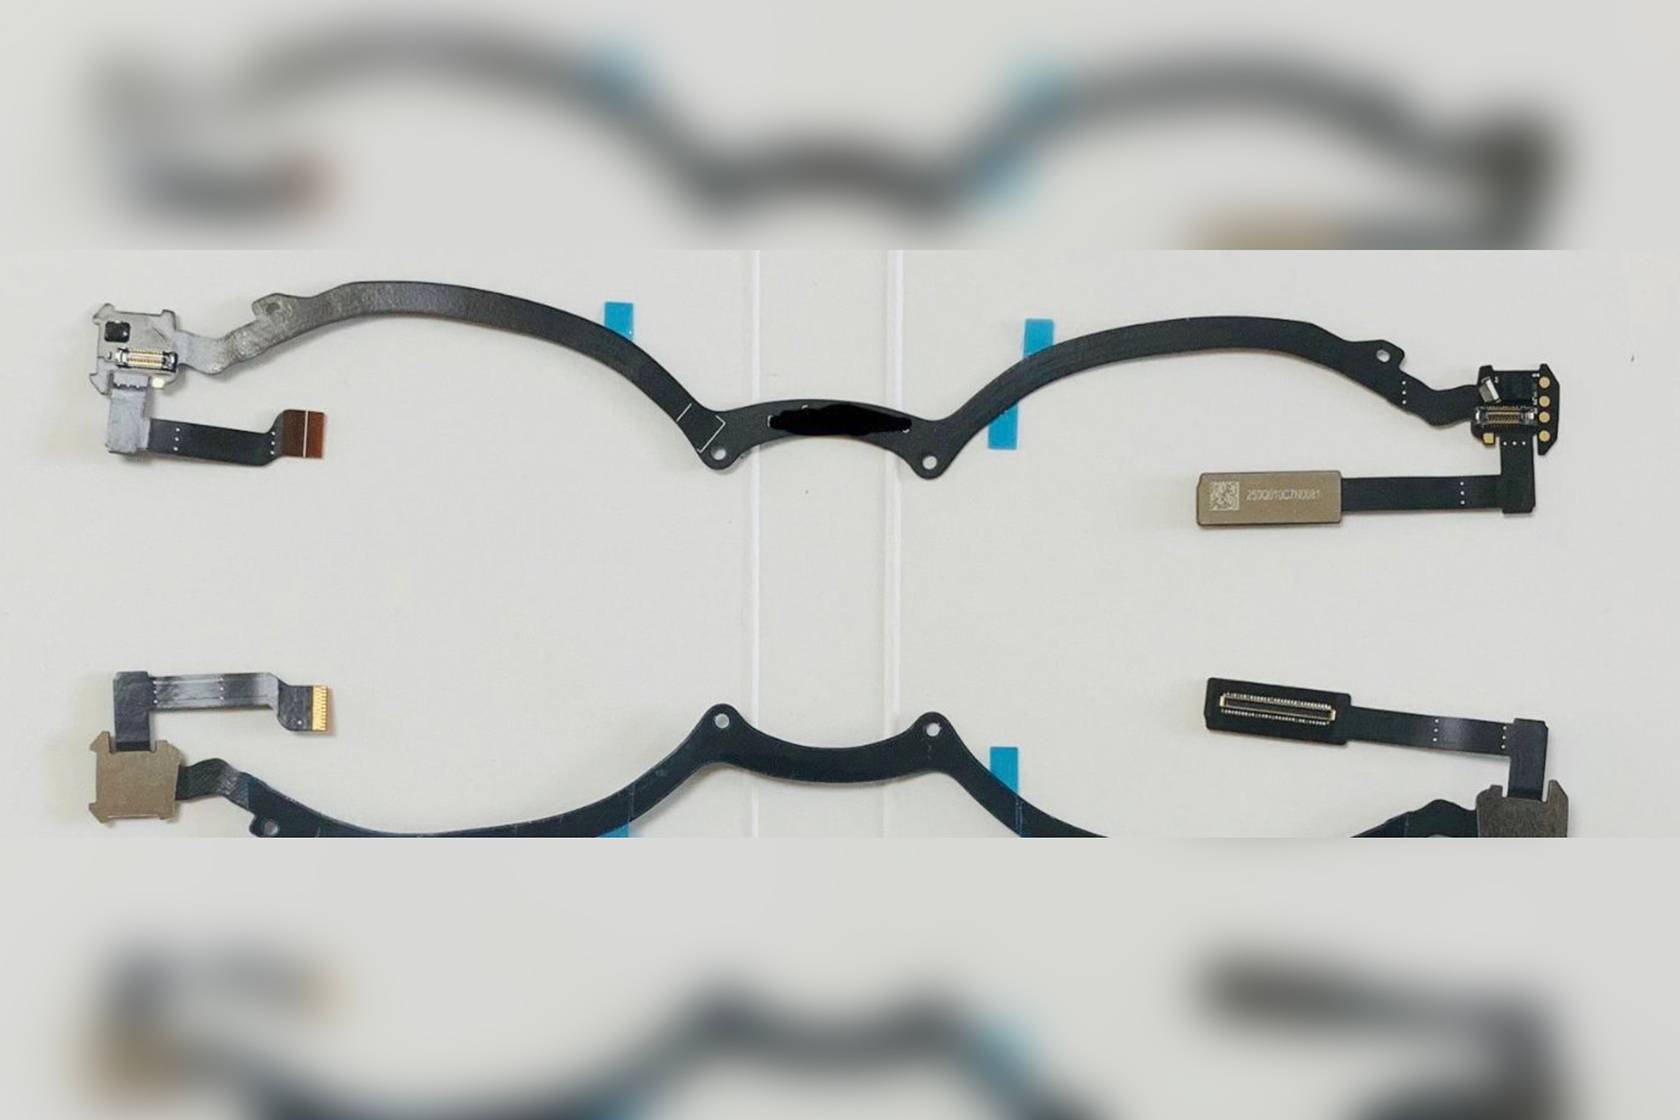 Apple's headset leaks online (or at least the parts did)